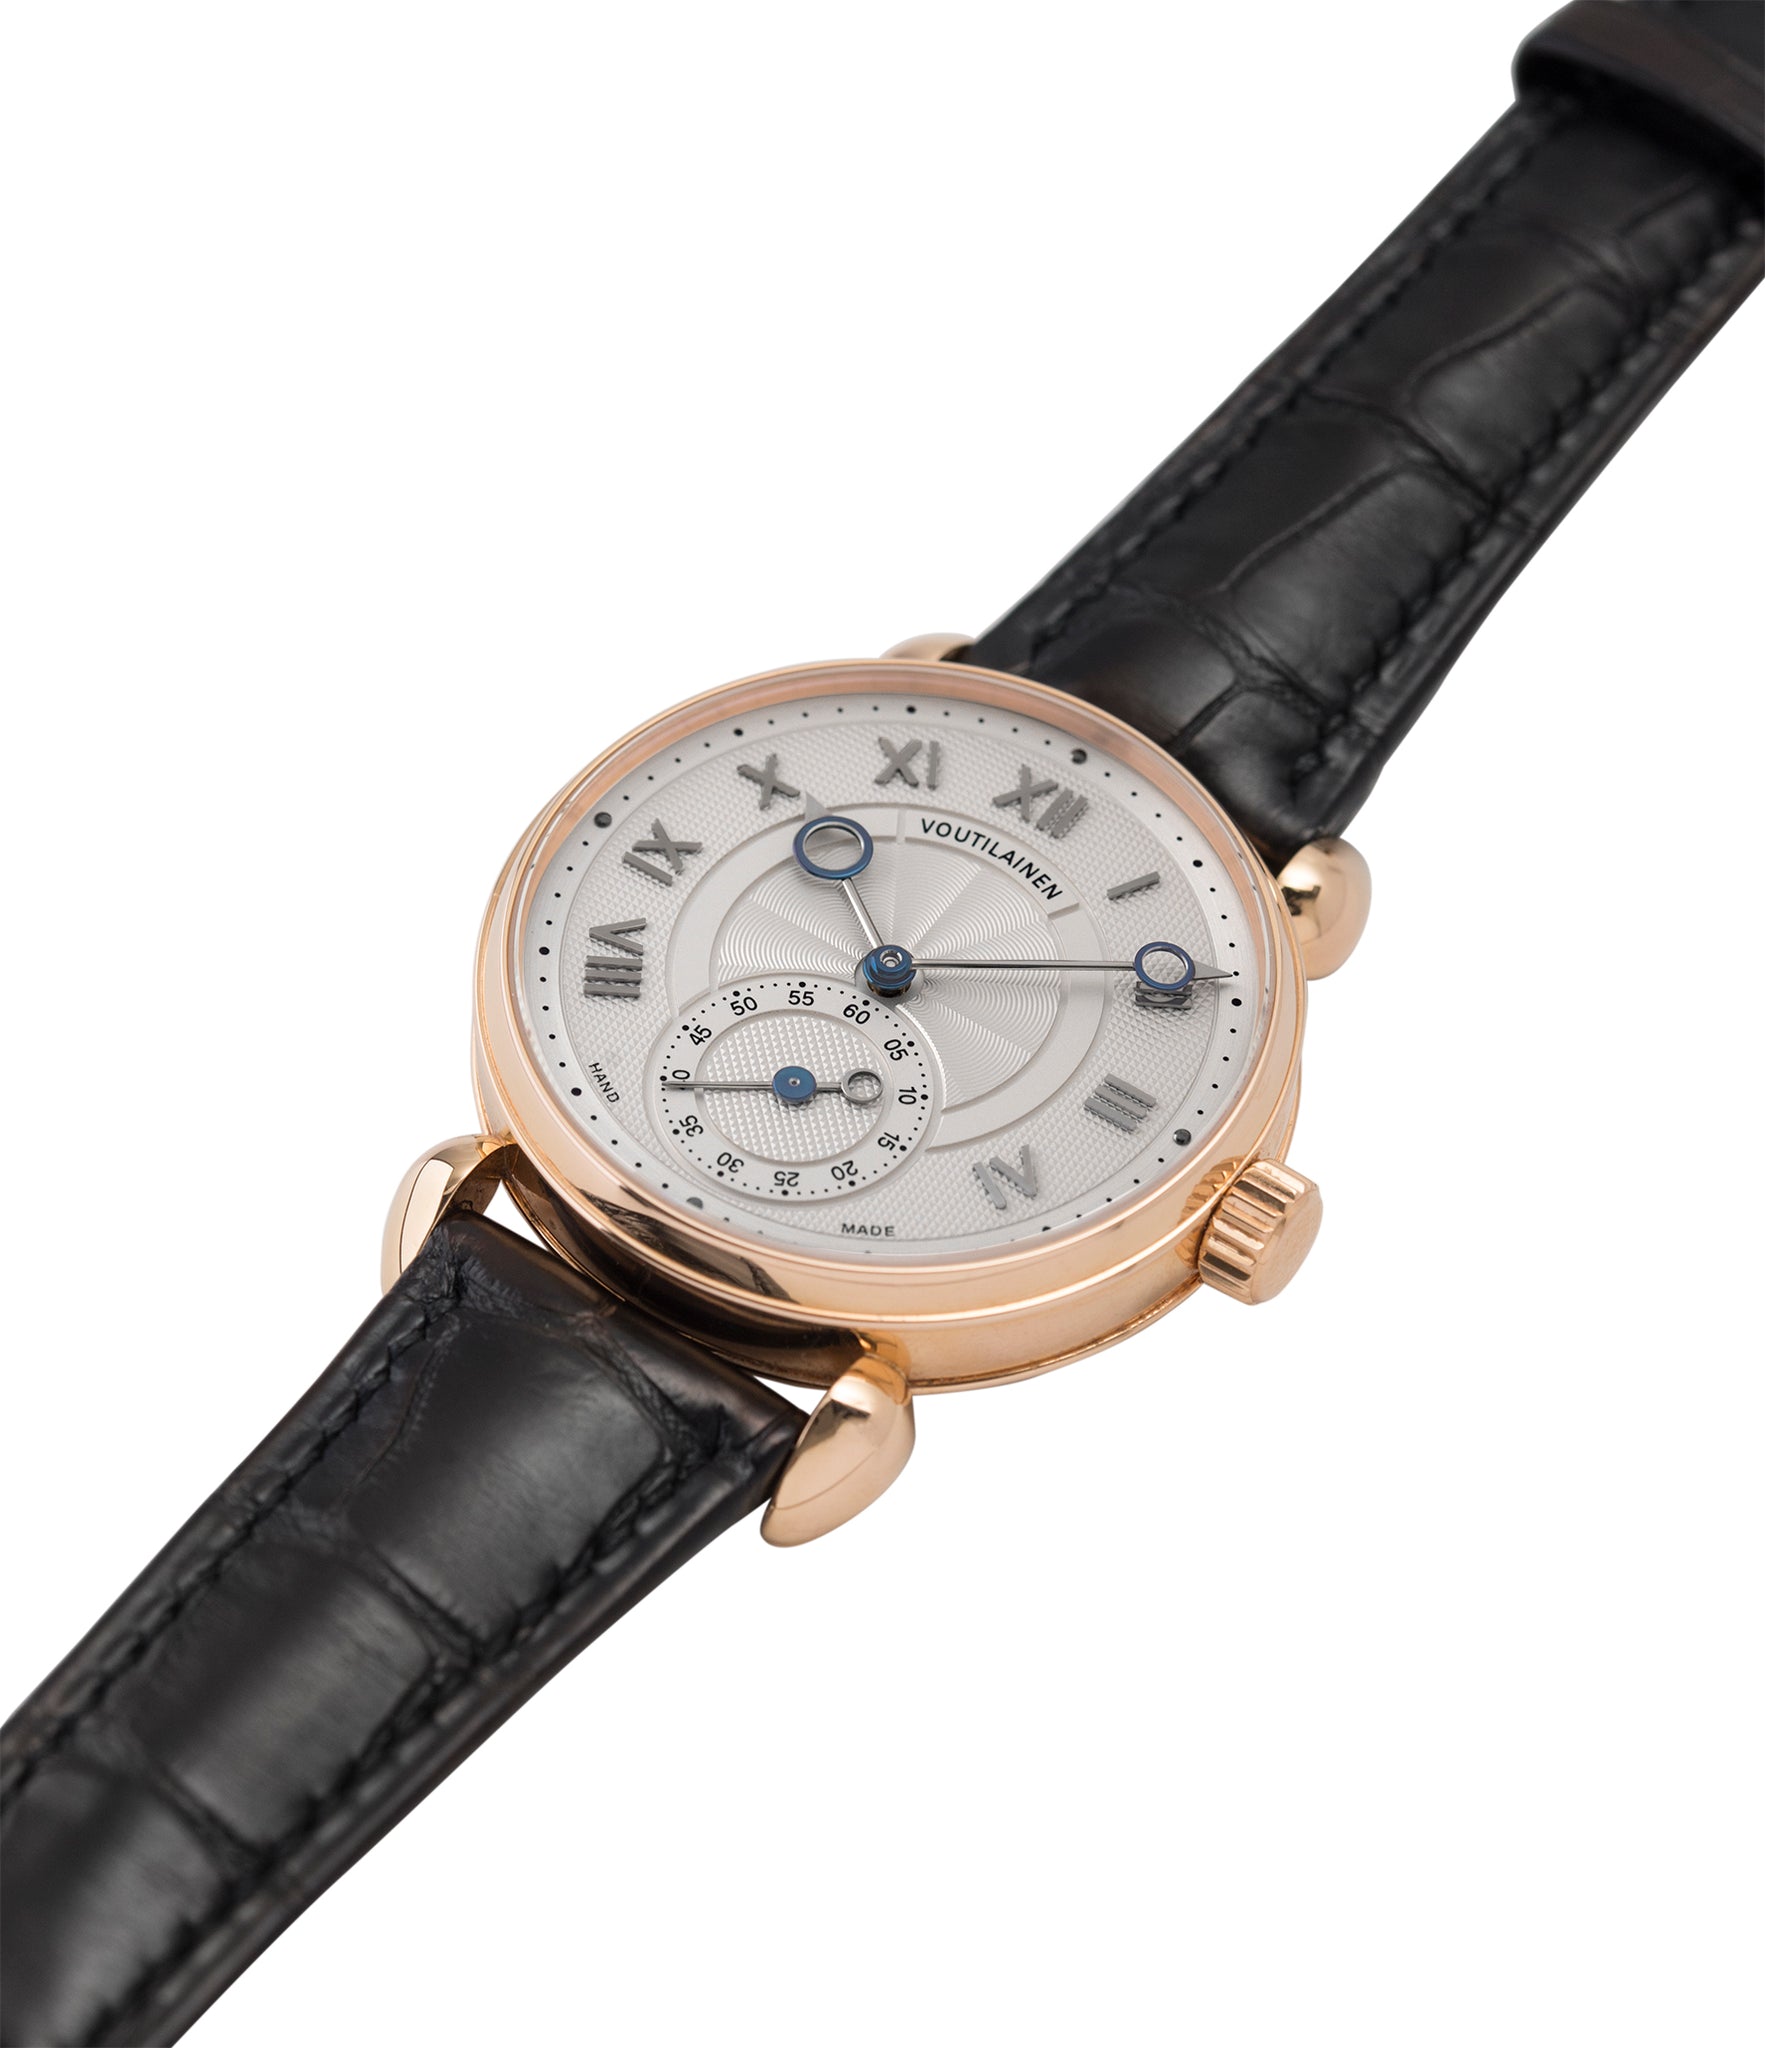 selling Voutilainen Observatoire Limited Edition rose gold rare dress watch for sale online at A Collected Man London endorsed seller of independent watchmaker